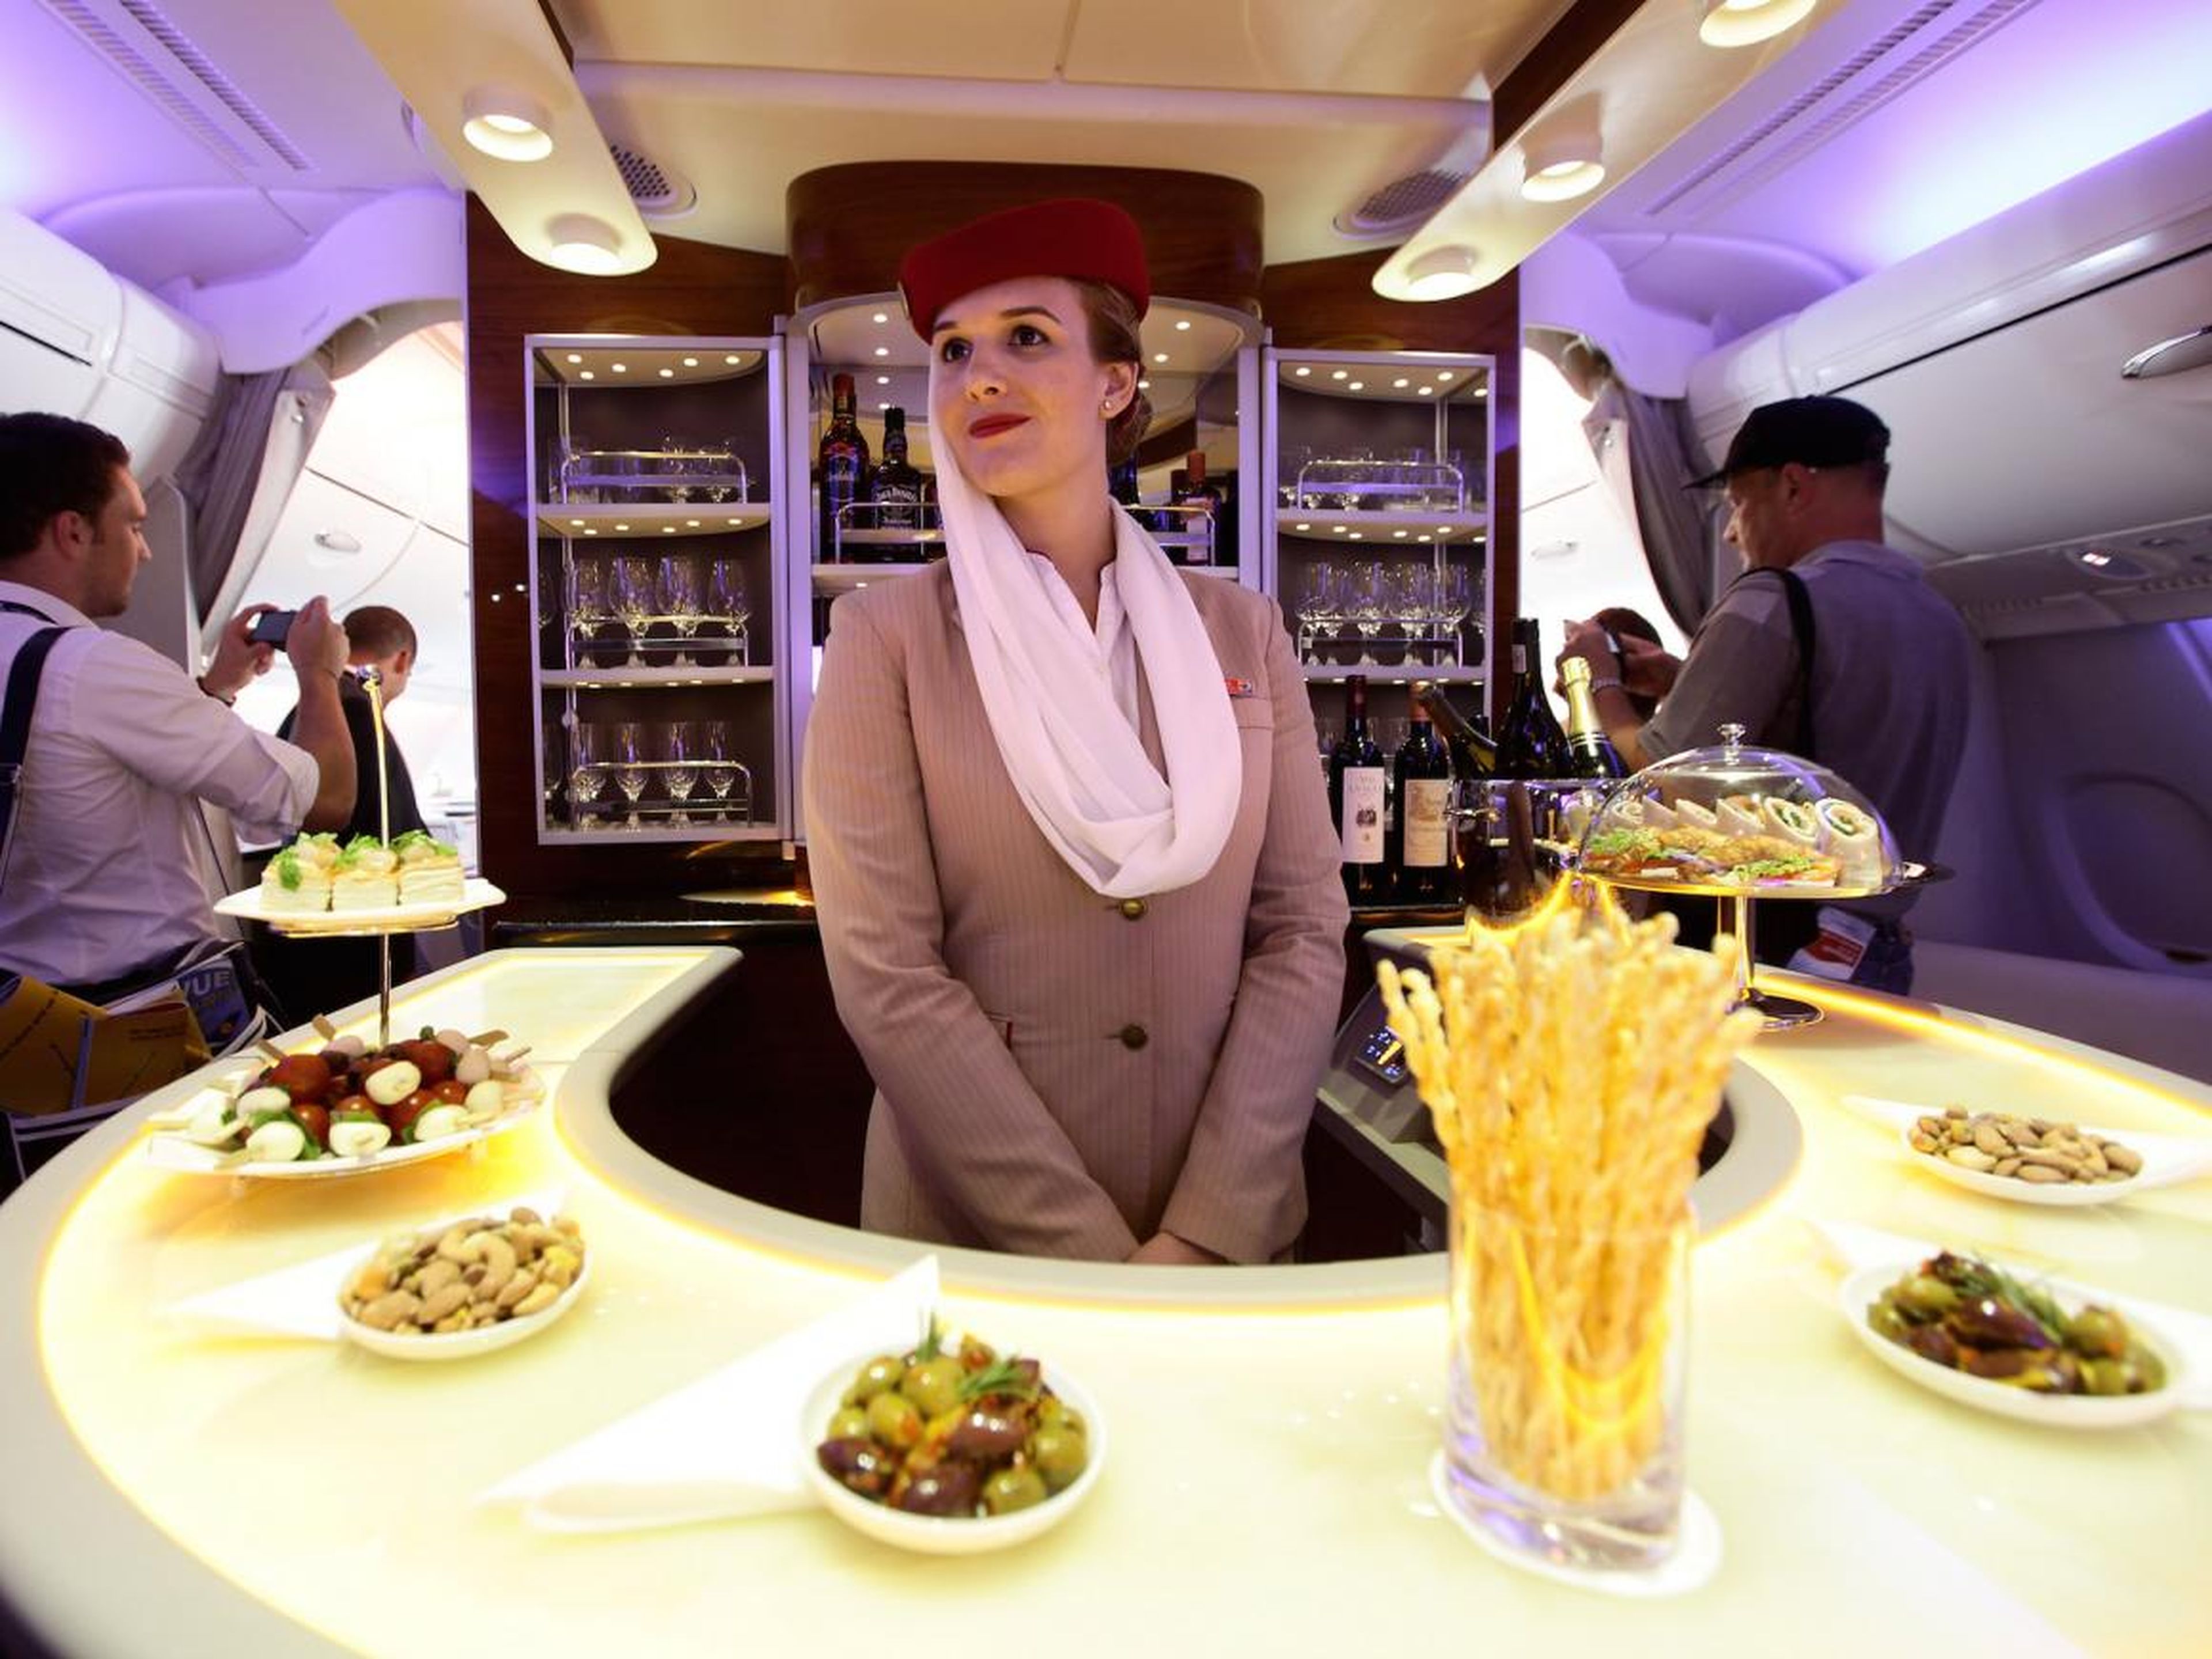 What's more glamorous than getting paid to travel? That's the job description of a flight attendant in a nutshell, which comes complete with perks like flying standby for free or discounted prices and getting to explore exotic